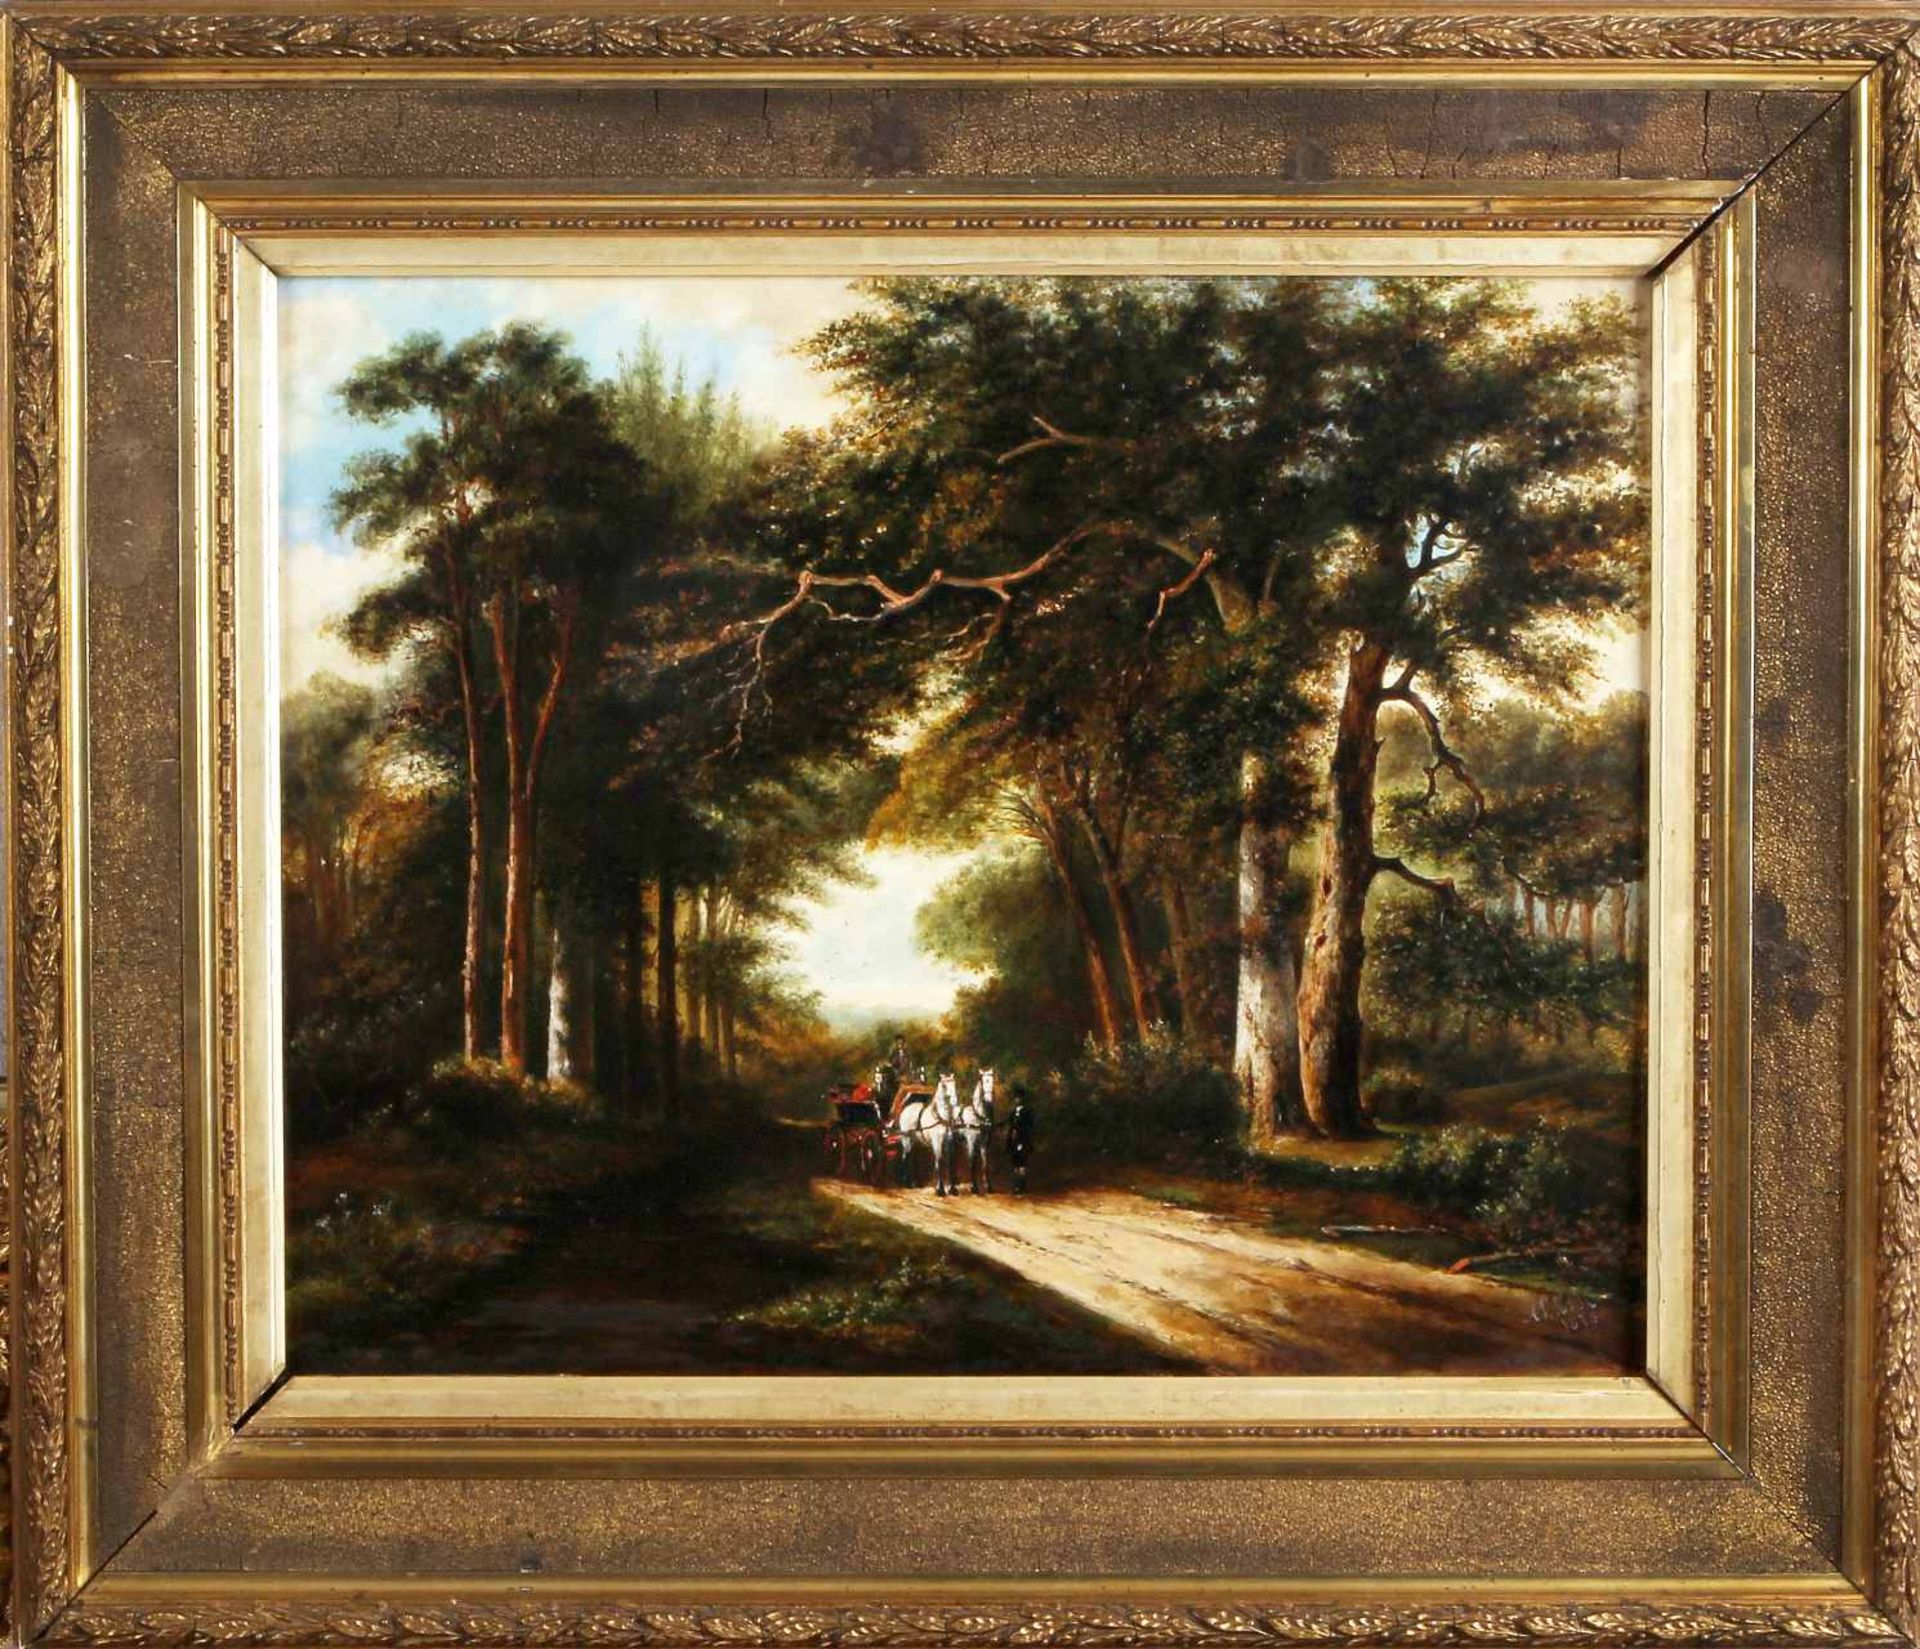 Monogram in 1875, pendant, two landscapes by horse and chariots and figures, oil on panel 35x45cm.